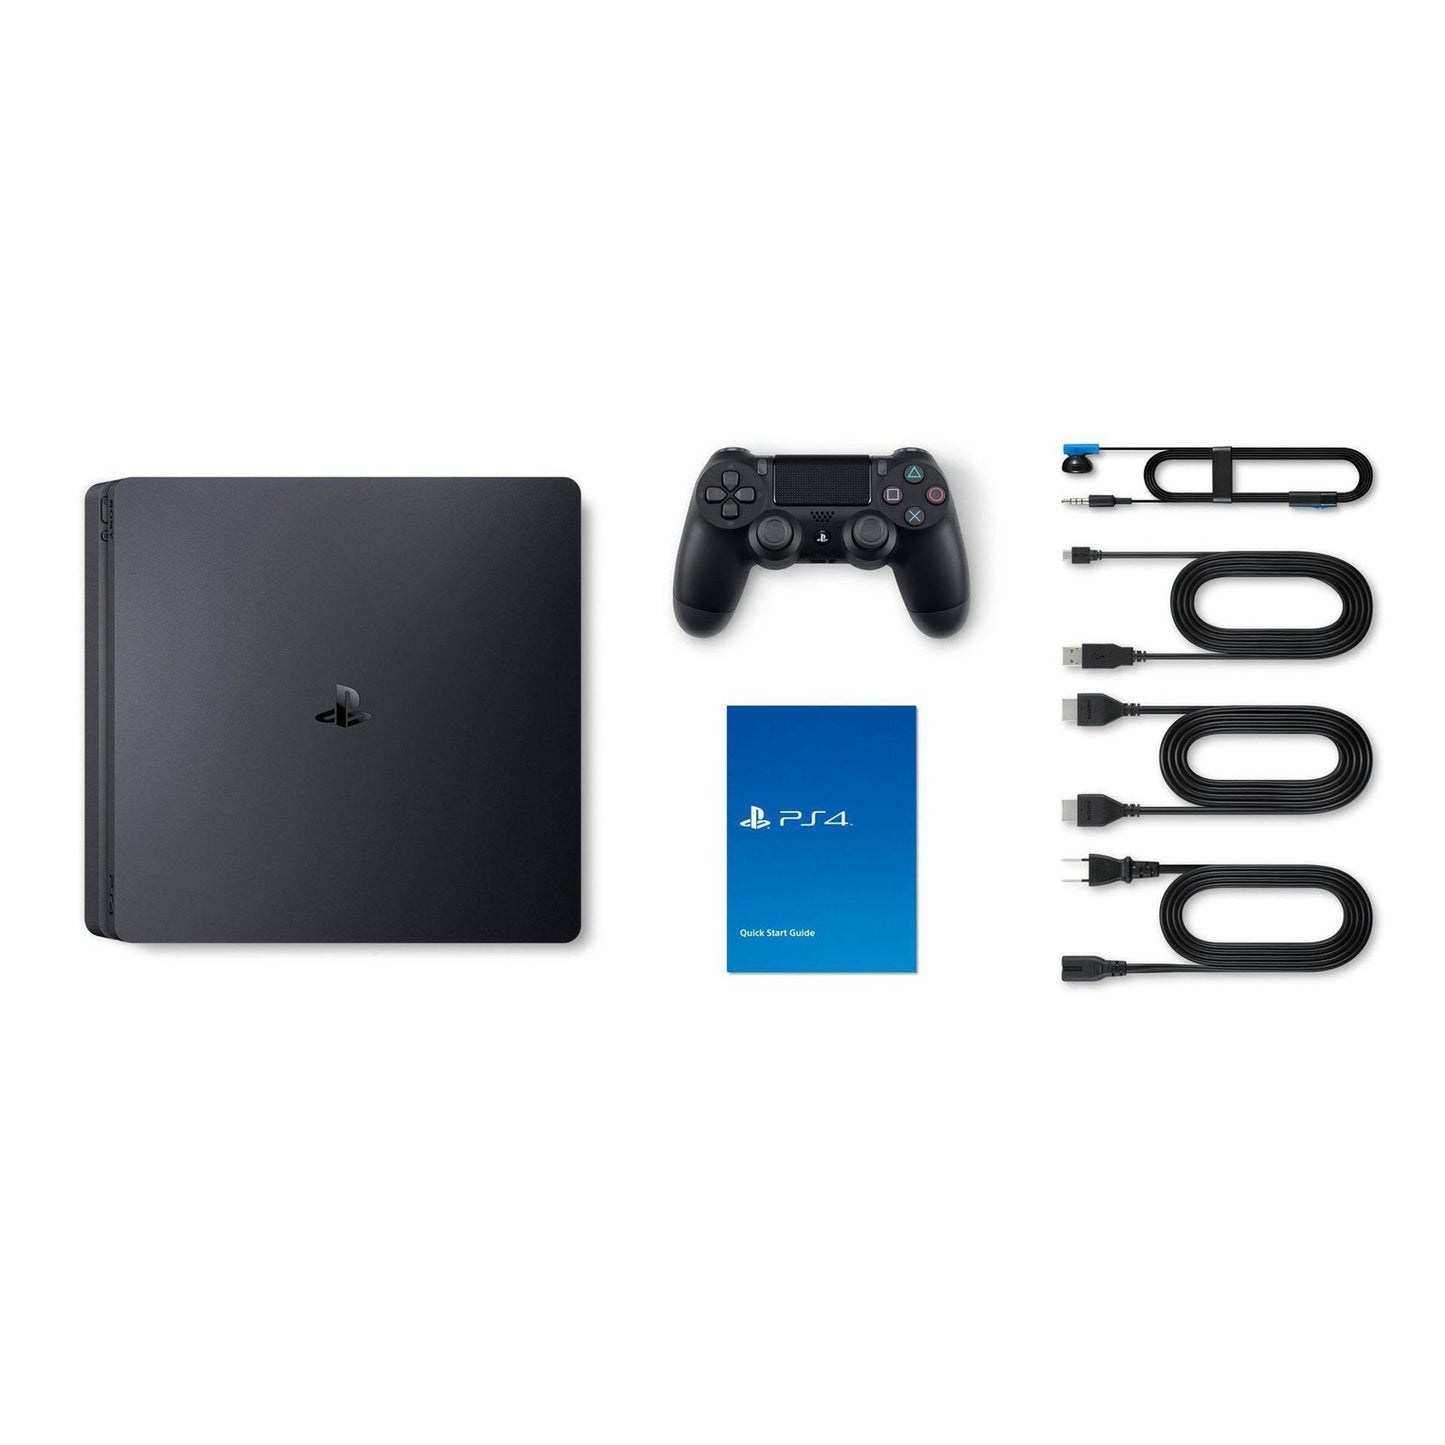 Sony 2215B PlayStation 4 Slim 1TB Gaming Console Black with HDMI Cable (Used)